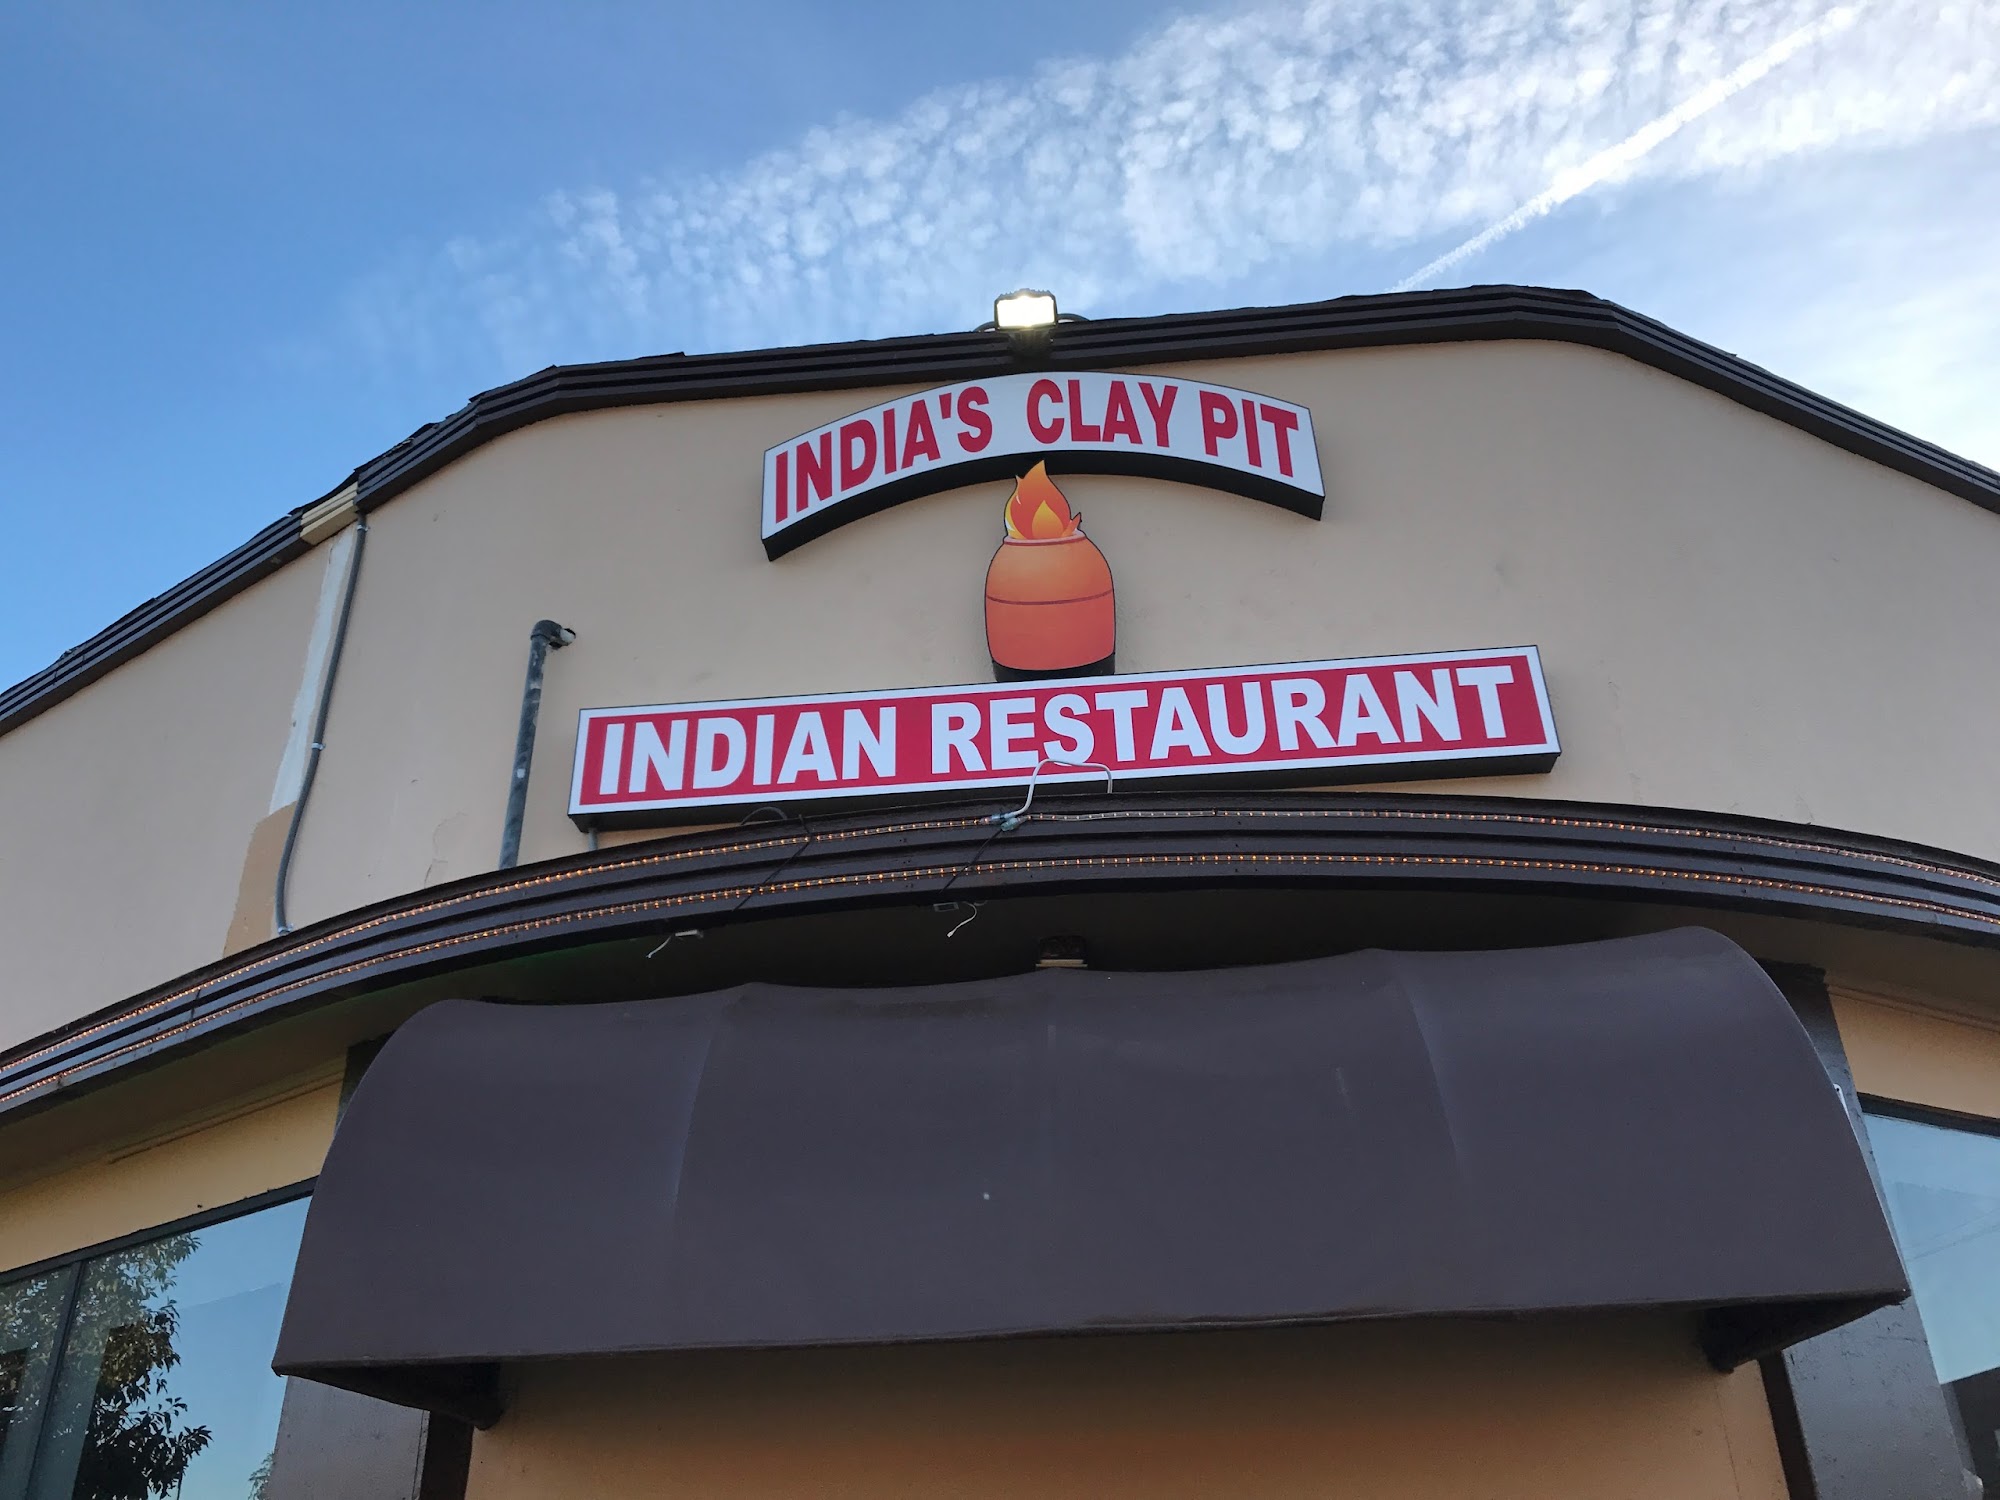 India's Clay Pit NoHo Best Indian Restaurant North Hollywood